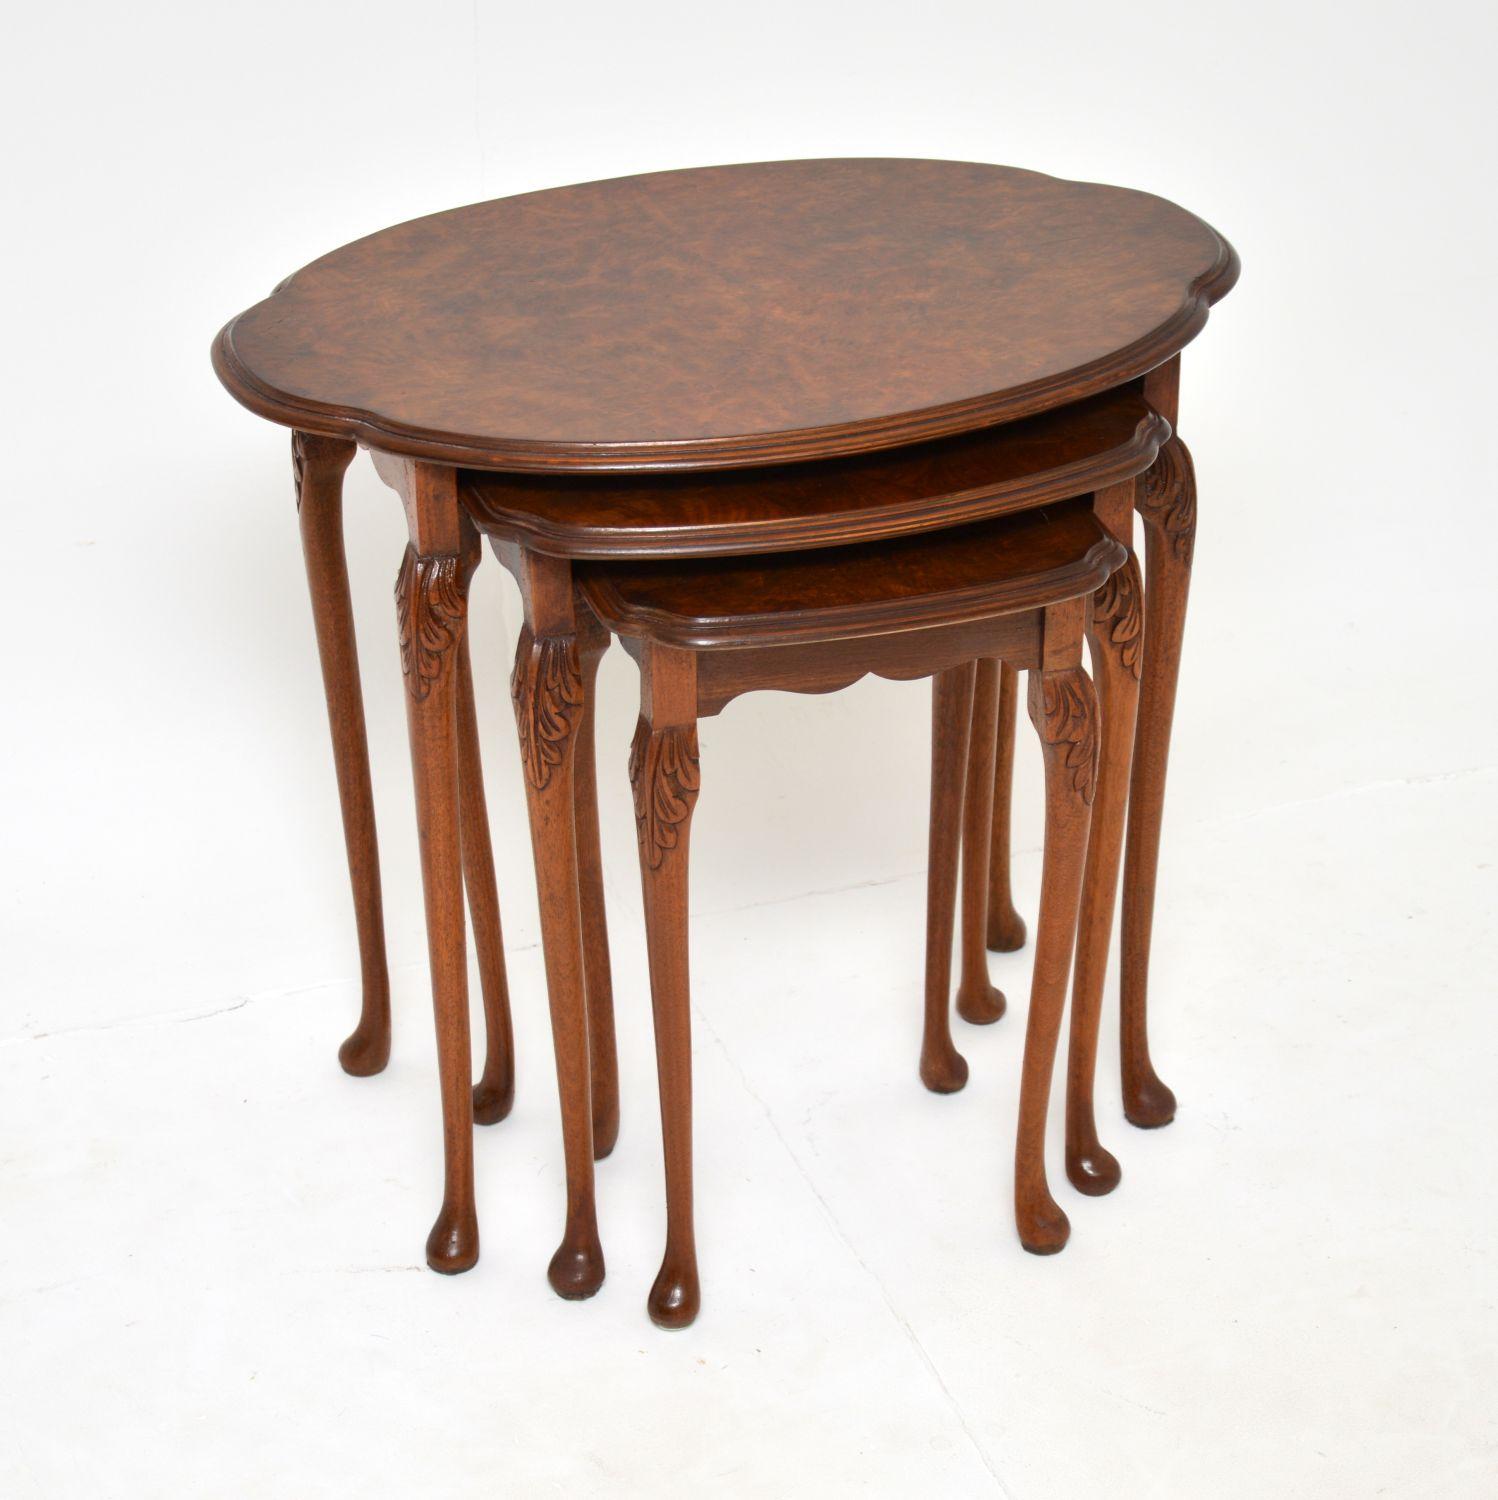 A smart and useful antique nest of three tables in walnut. These were made in England, they date from around the 1900-1920’s period.

They are of lovely quality and are very practical. The tops are nicely shaped and have gorgeous burr walnut grain